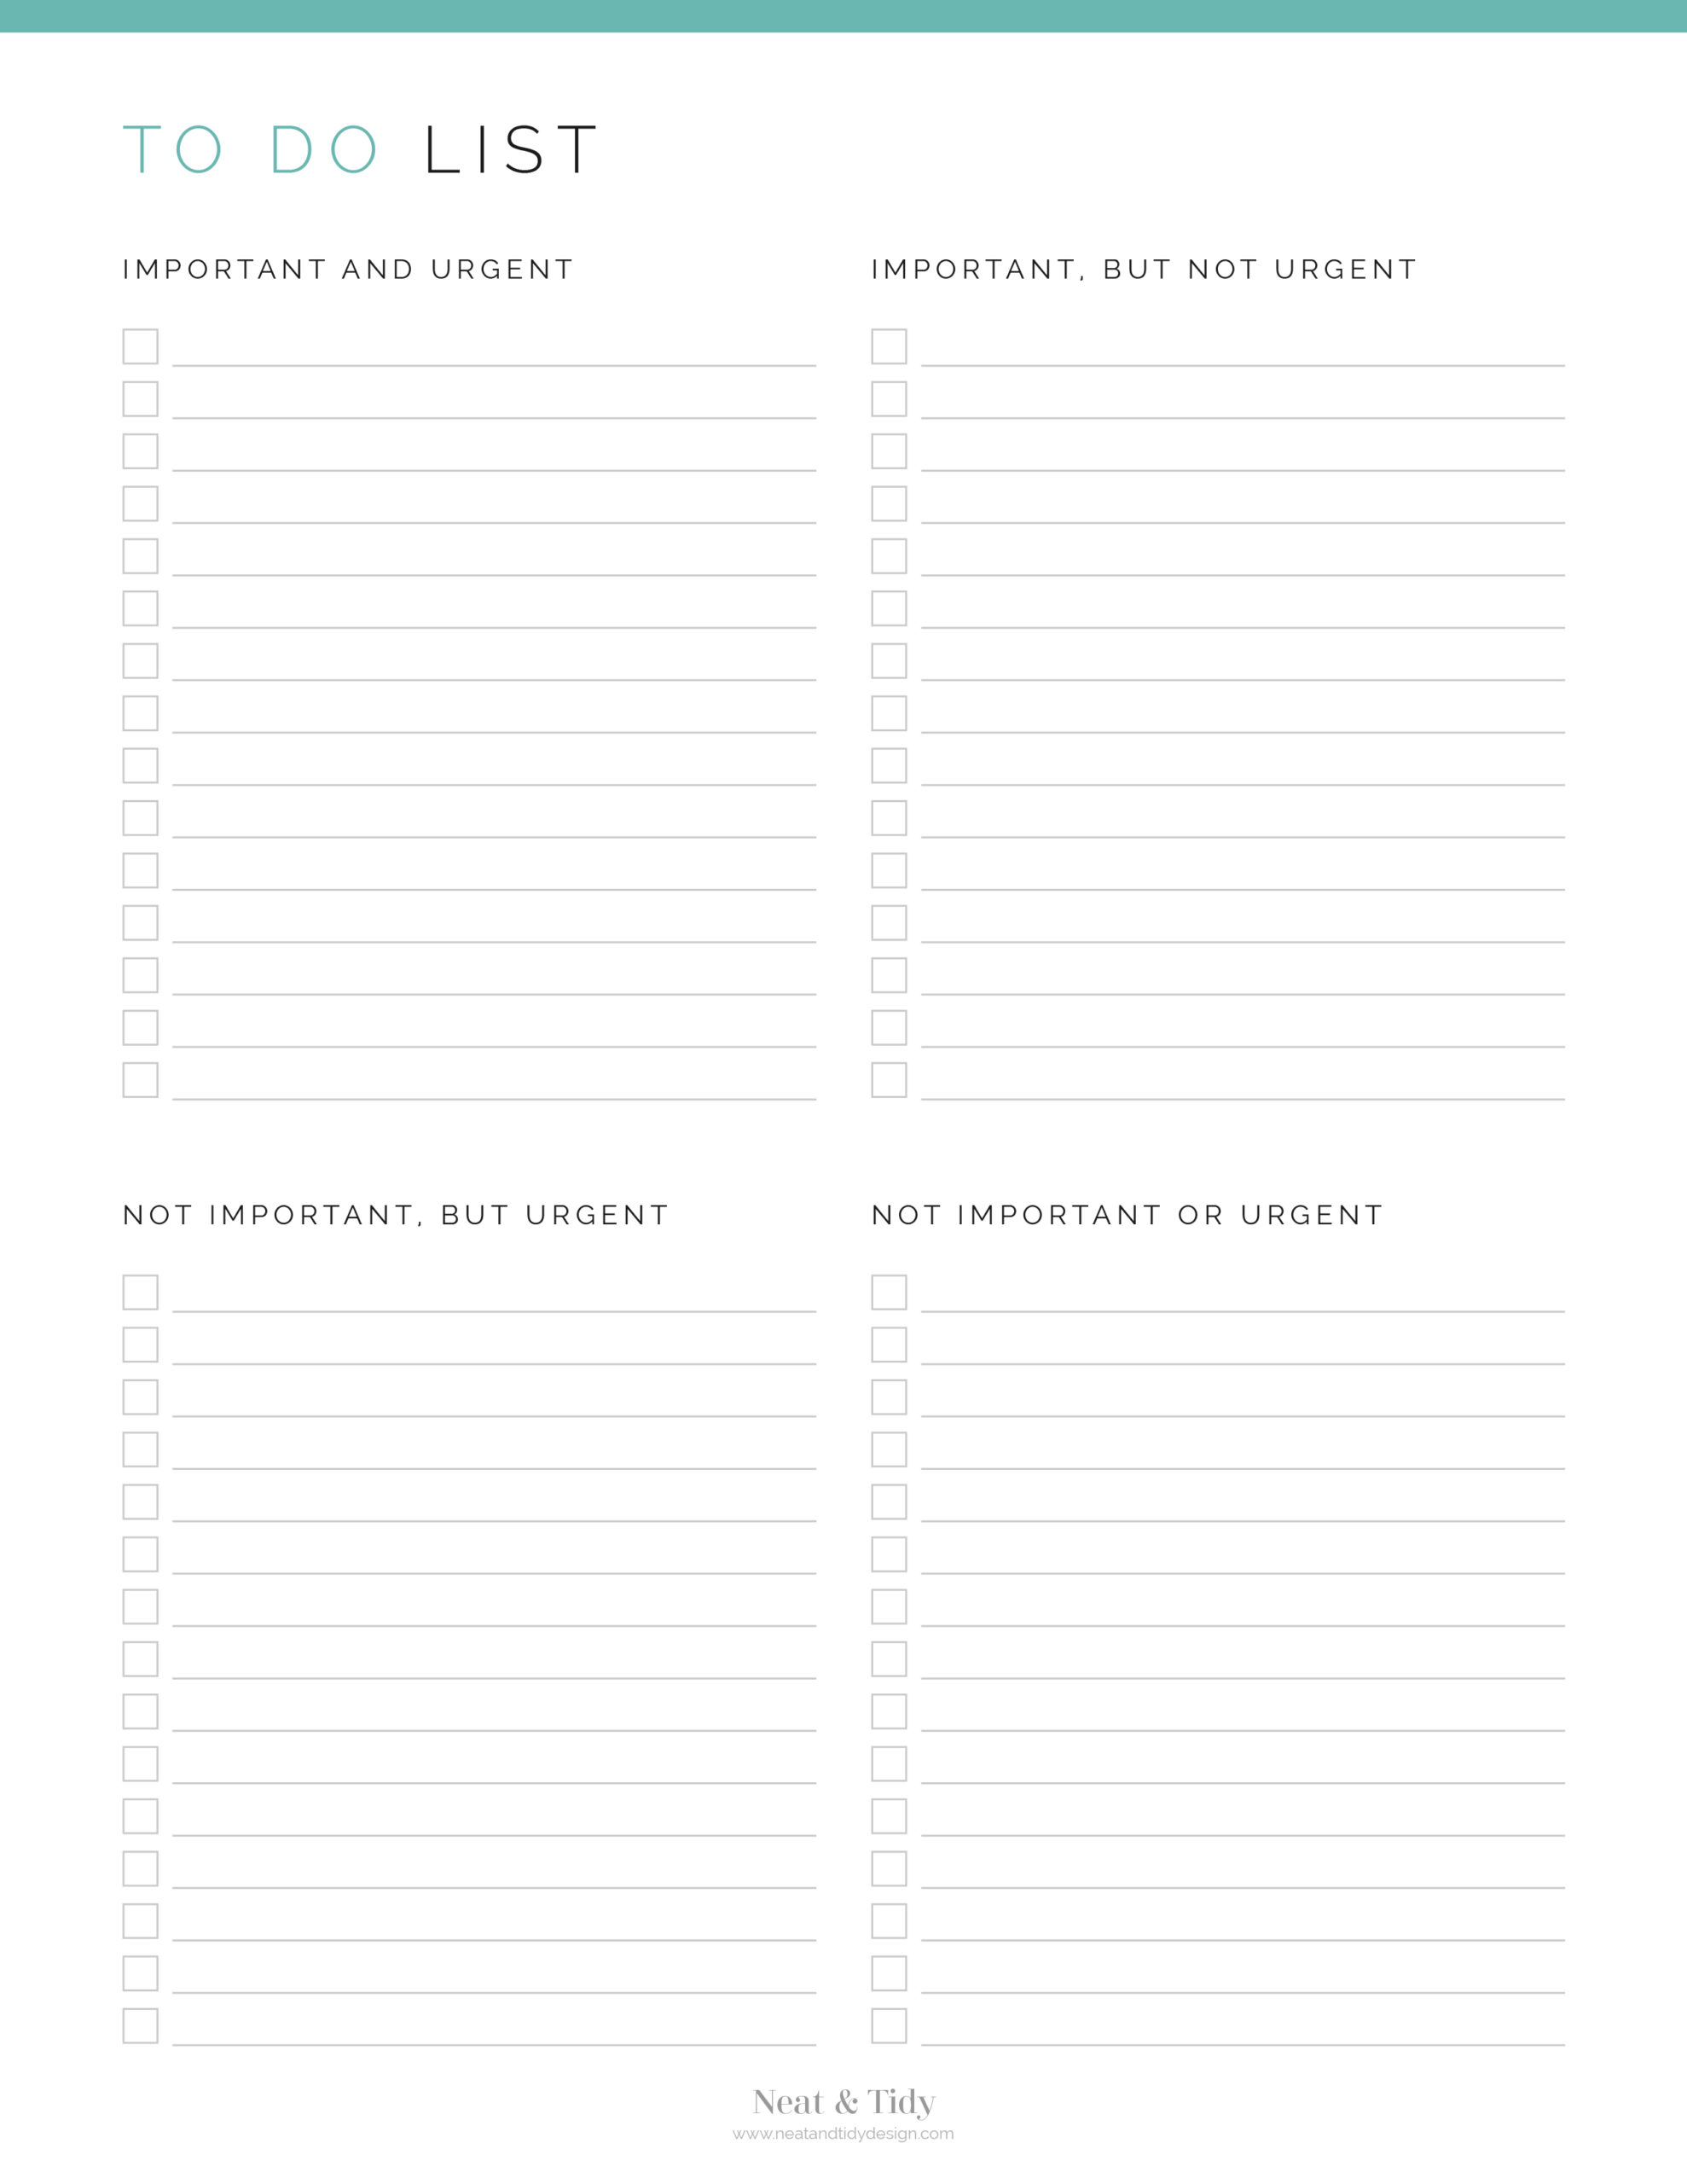 Quadrant To Do List - Neat and Tidy Design